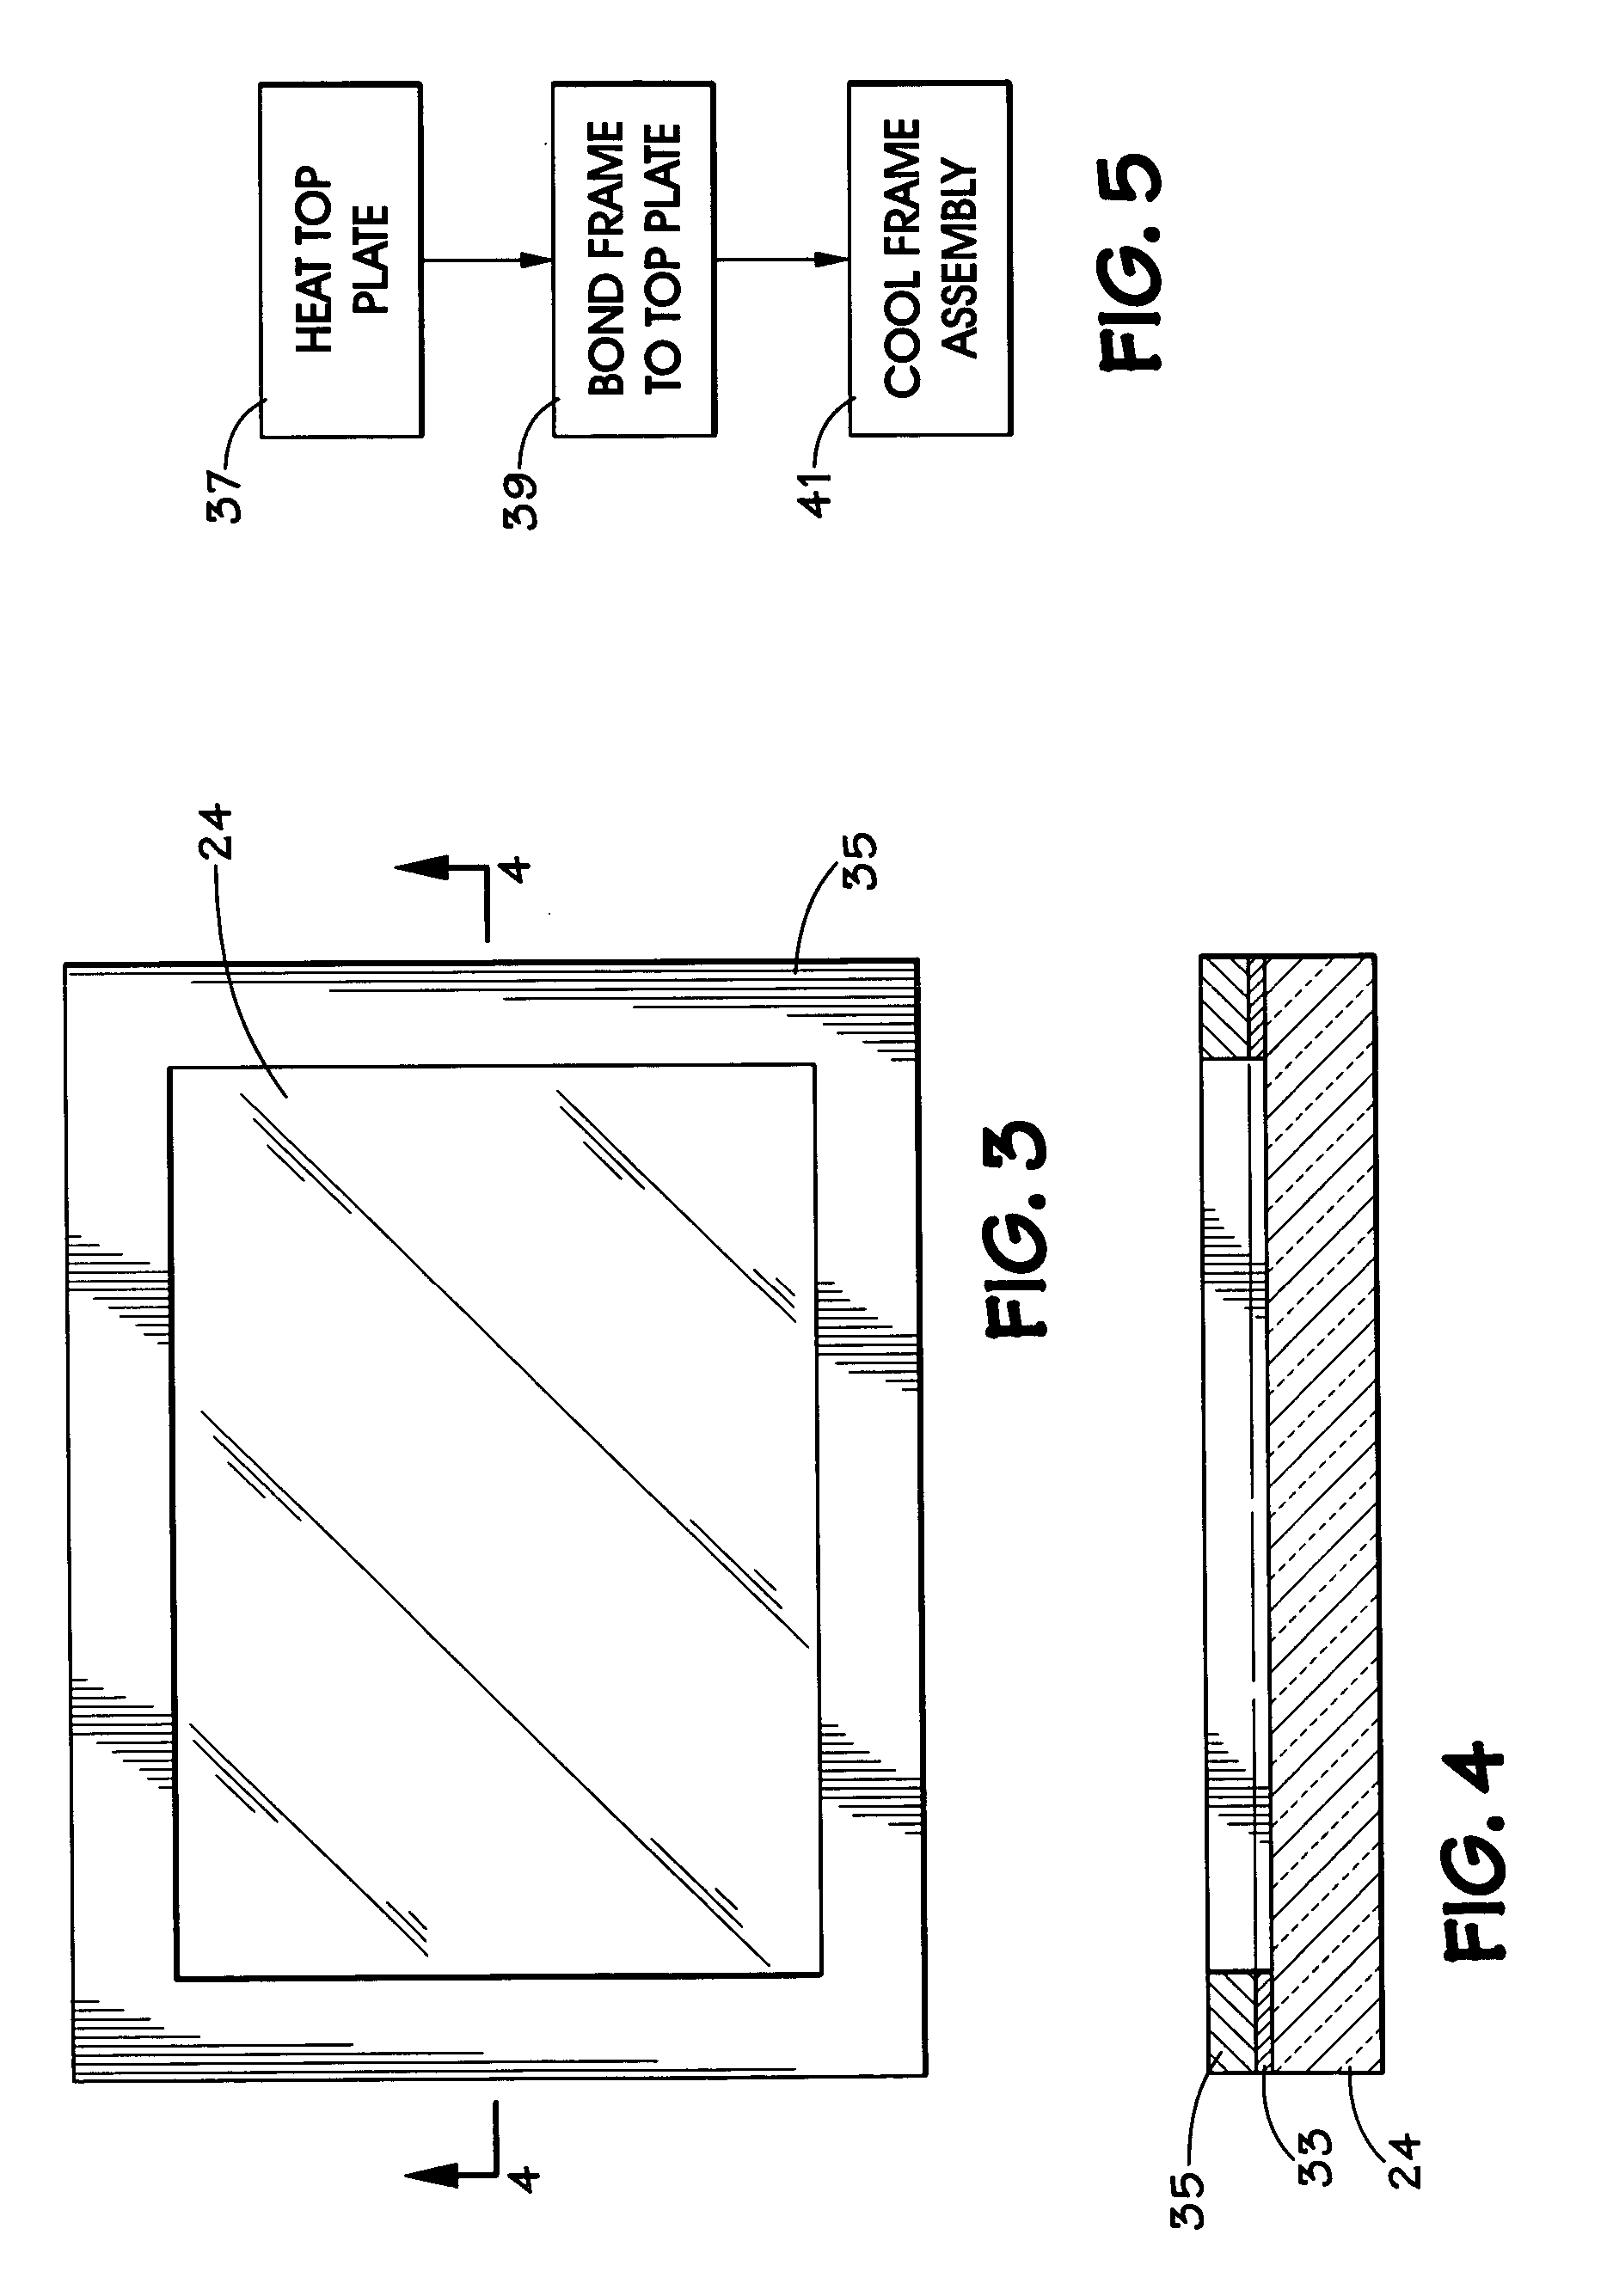 Resistive touch panel using removable, tensioned top layer